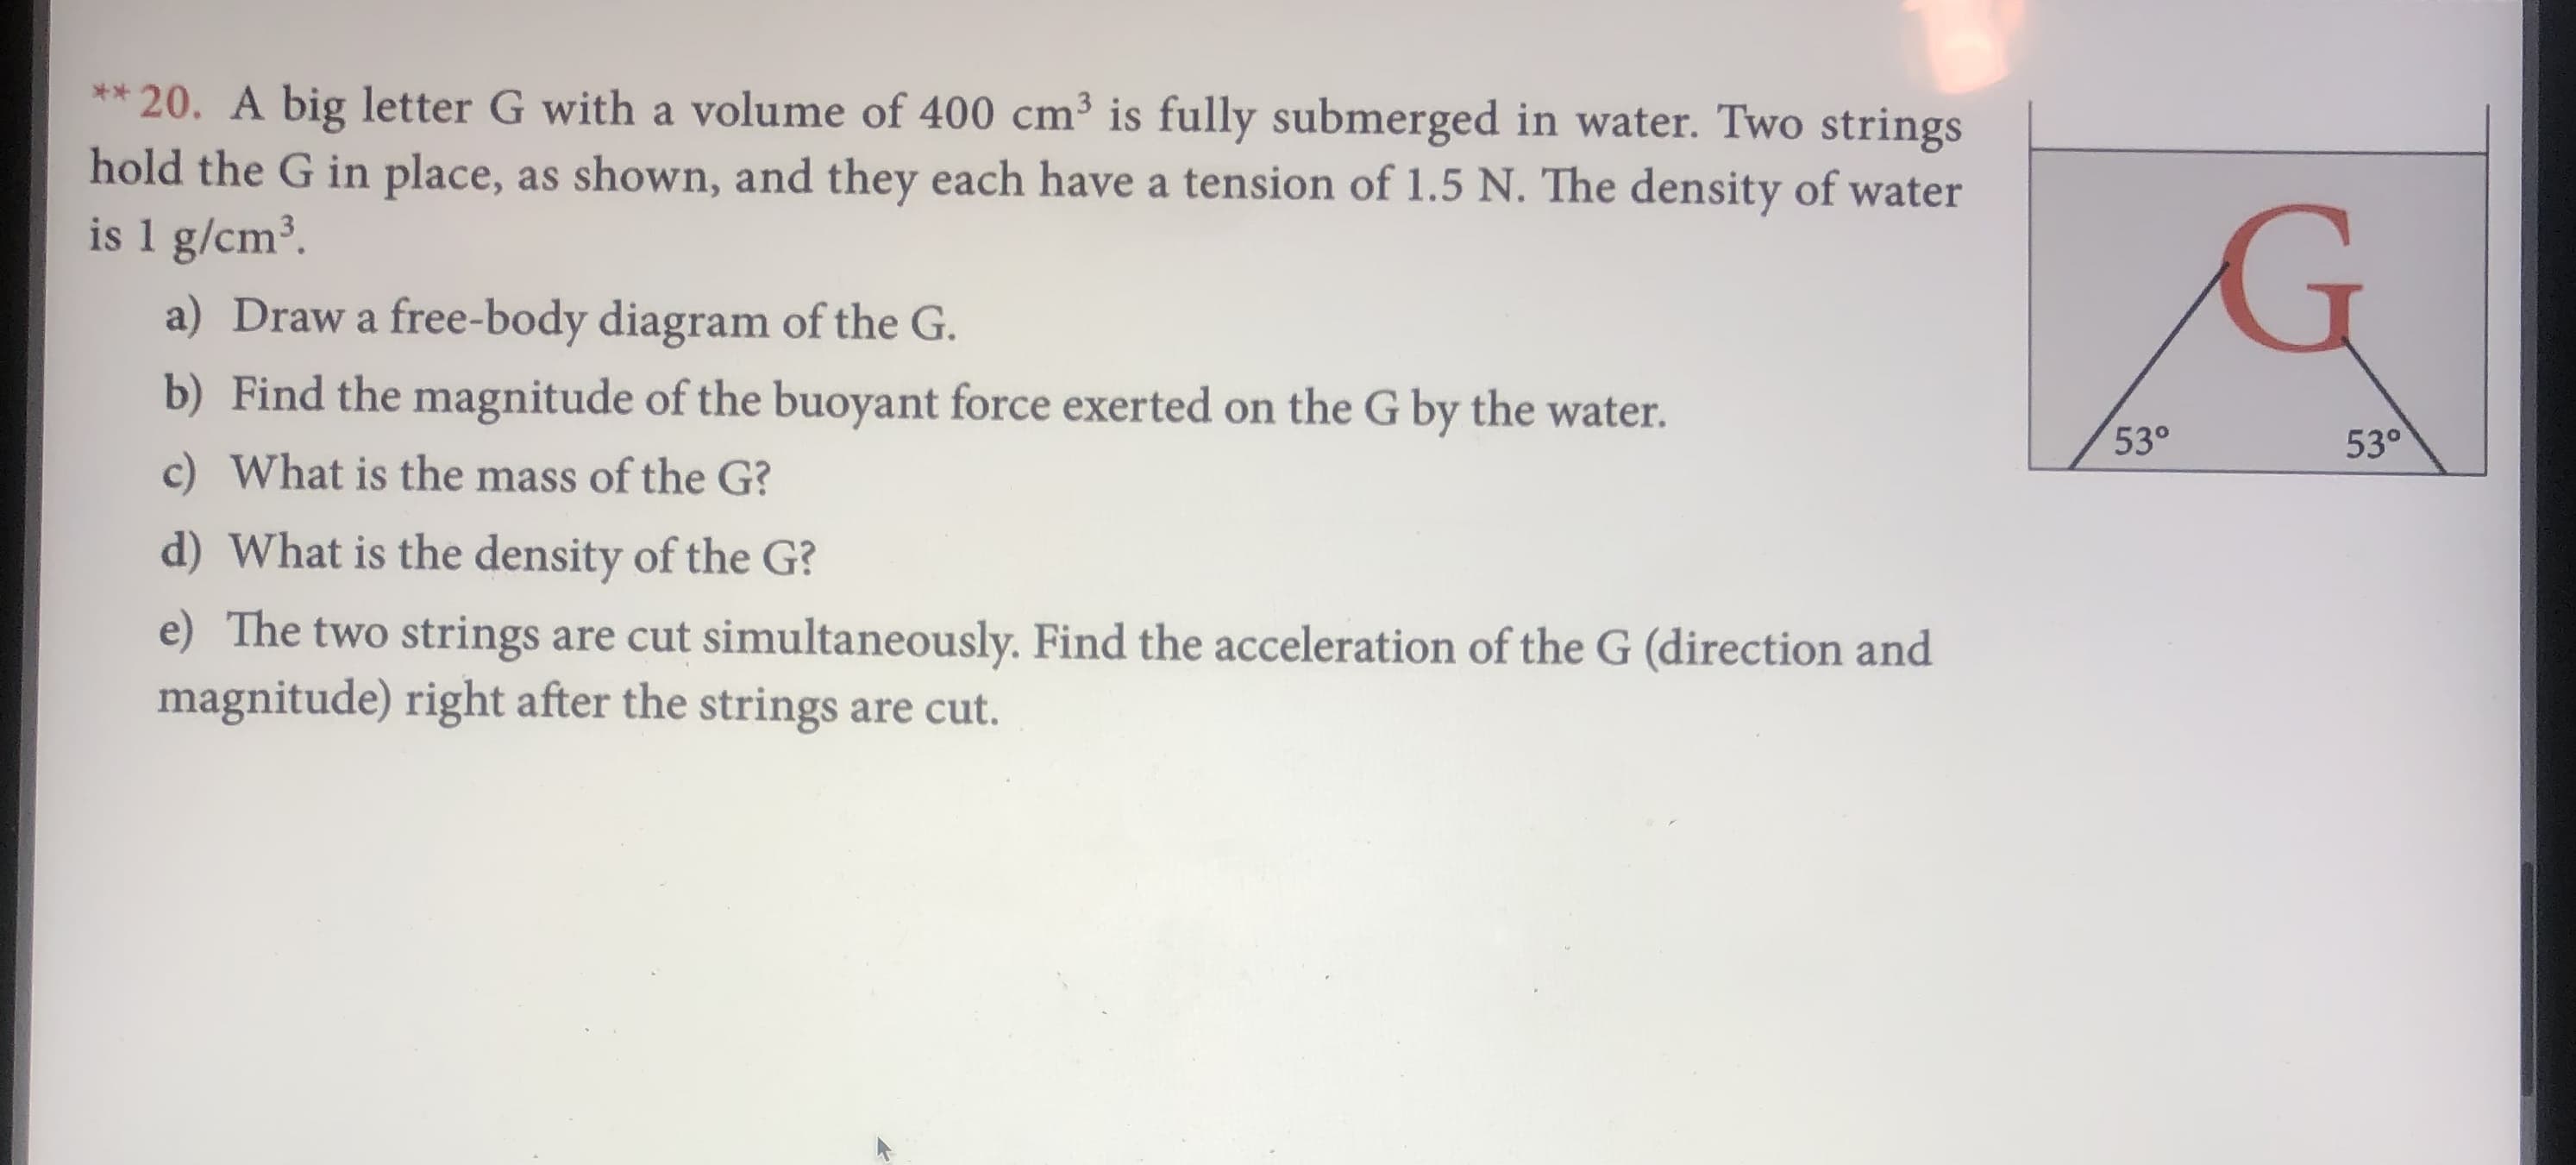 **20. A big letter G with a volume of 400 cm3 is fully submerged in water. Two strings
hold the G in place, as shown, and they each have a tension of 1.5 N. The density of water
is 1 g/cm3
a) Draw a free-body diagram of the G.
b) Find the magnitude of the buoyant force exerted on the G by the water.
53°
53°
c) What is the mass of the G?
d) What is the density of the G?
e) The two strings are cut simultaneously. Find the acceleration of the G (direction and
magnitude) right after the strings are cut.
